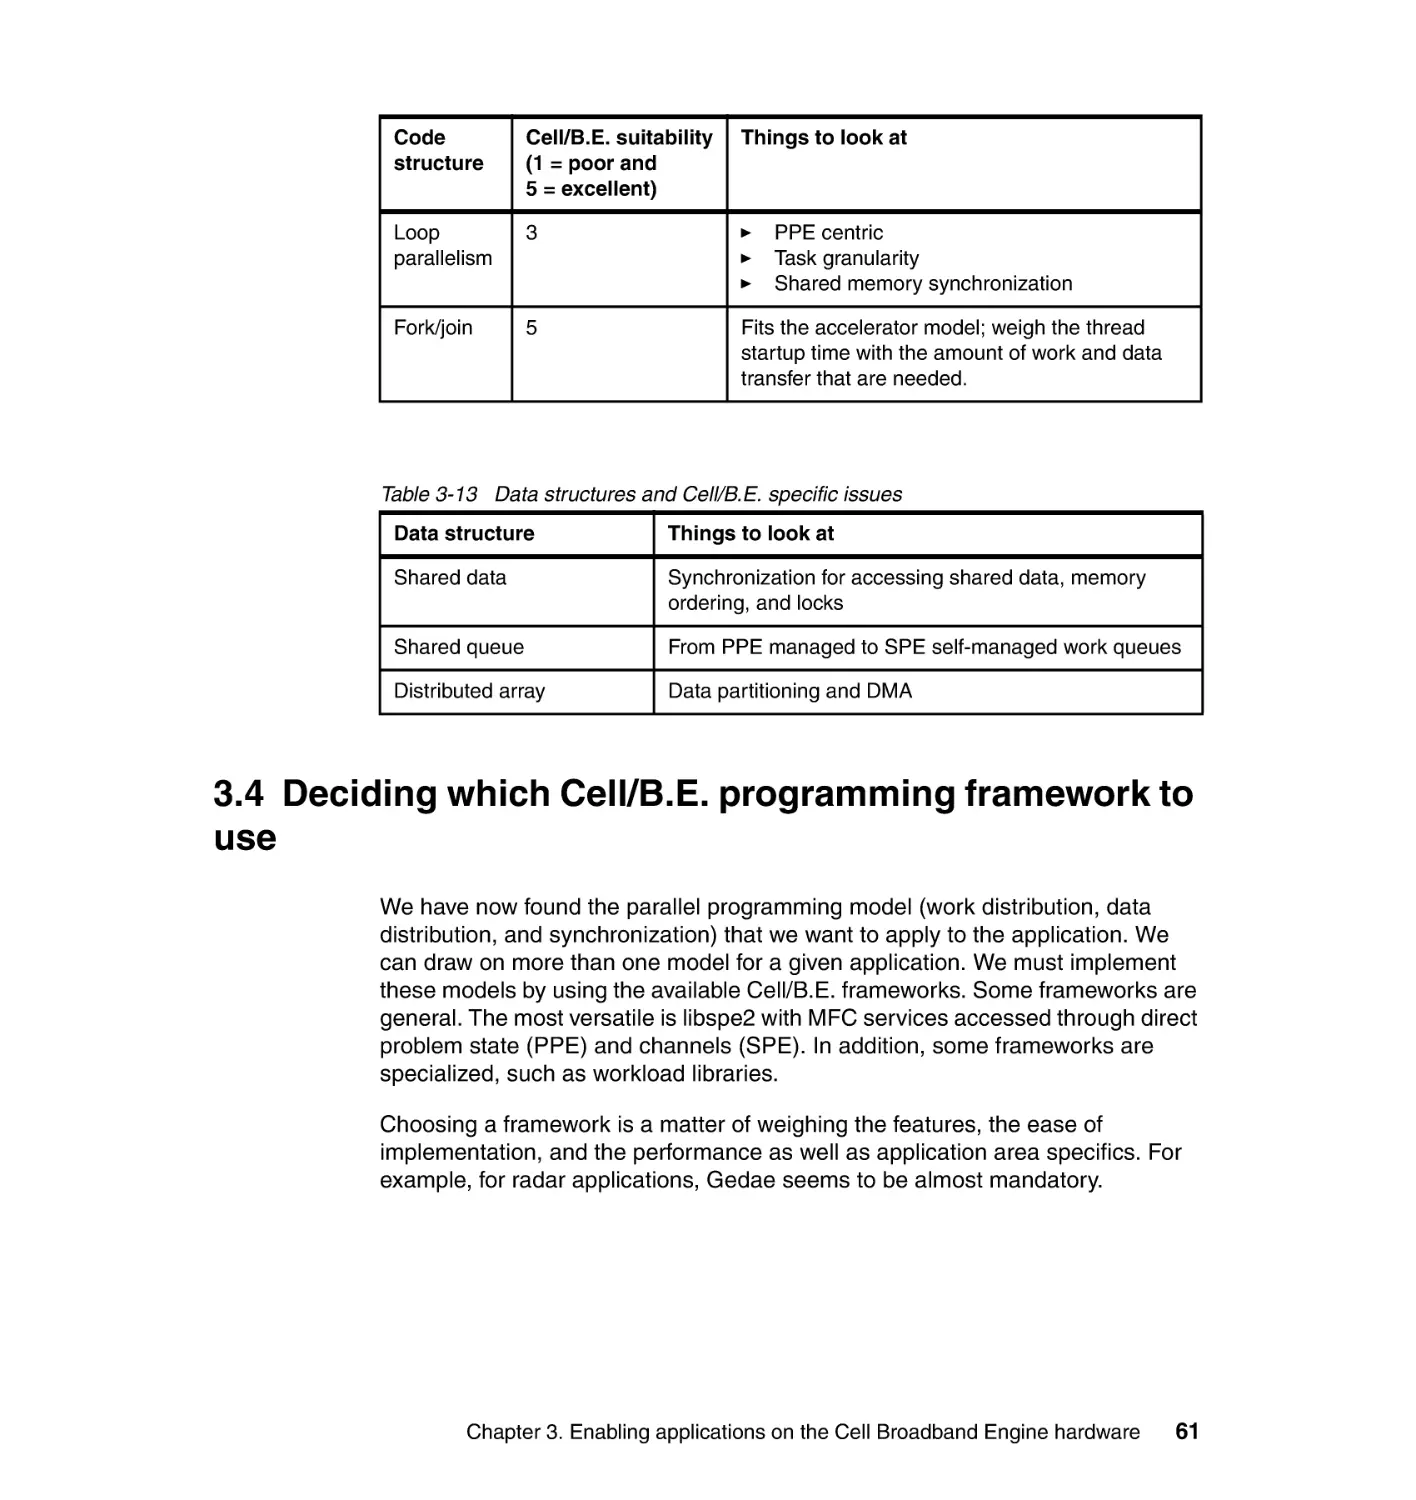 3.4 Deciding which Cell/B.E. programming framework to use